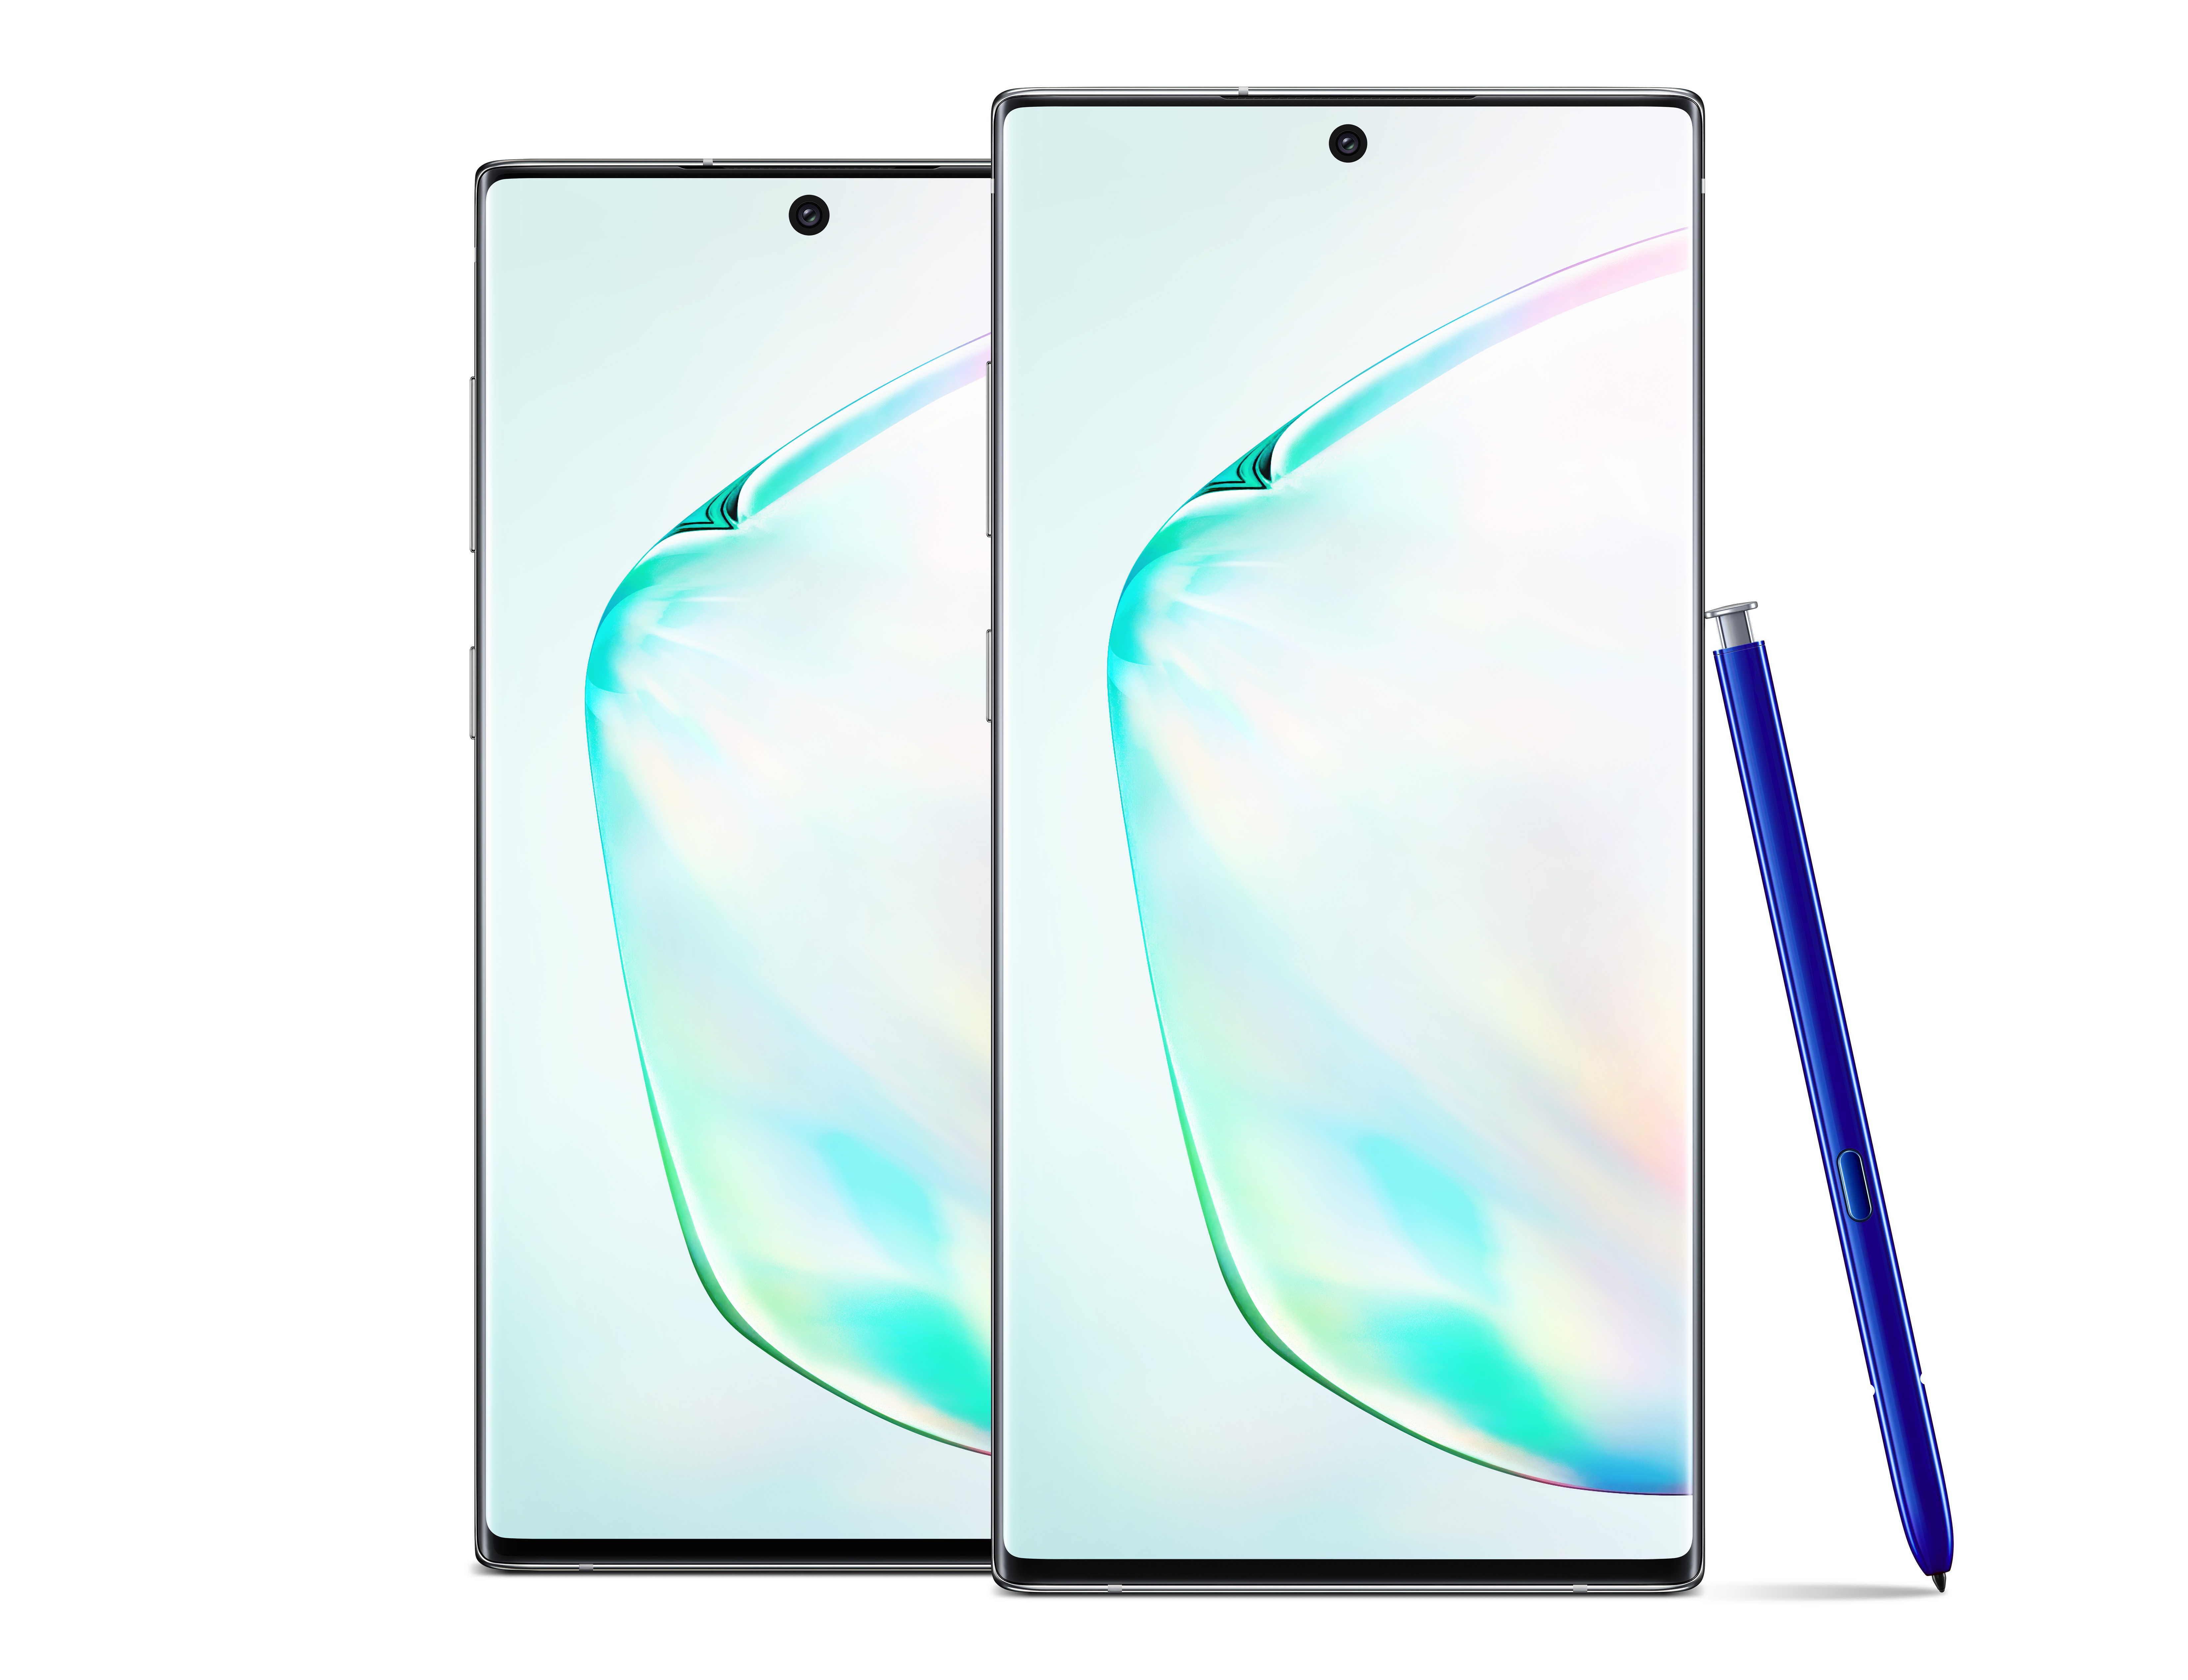 Xfinity Mobile To Offer Samsung Galaxy Note 10 And Galaxy Note 10+ With $250 Promotion